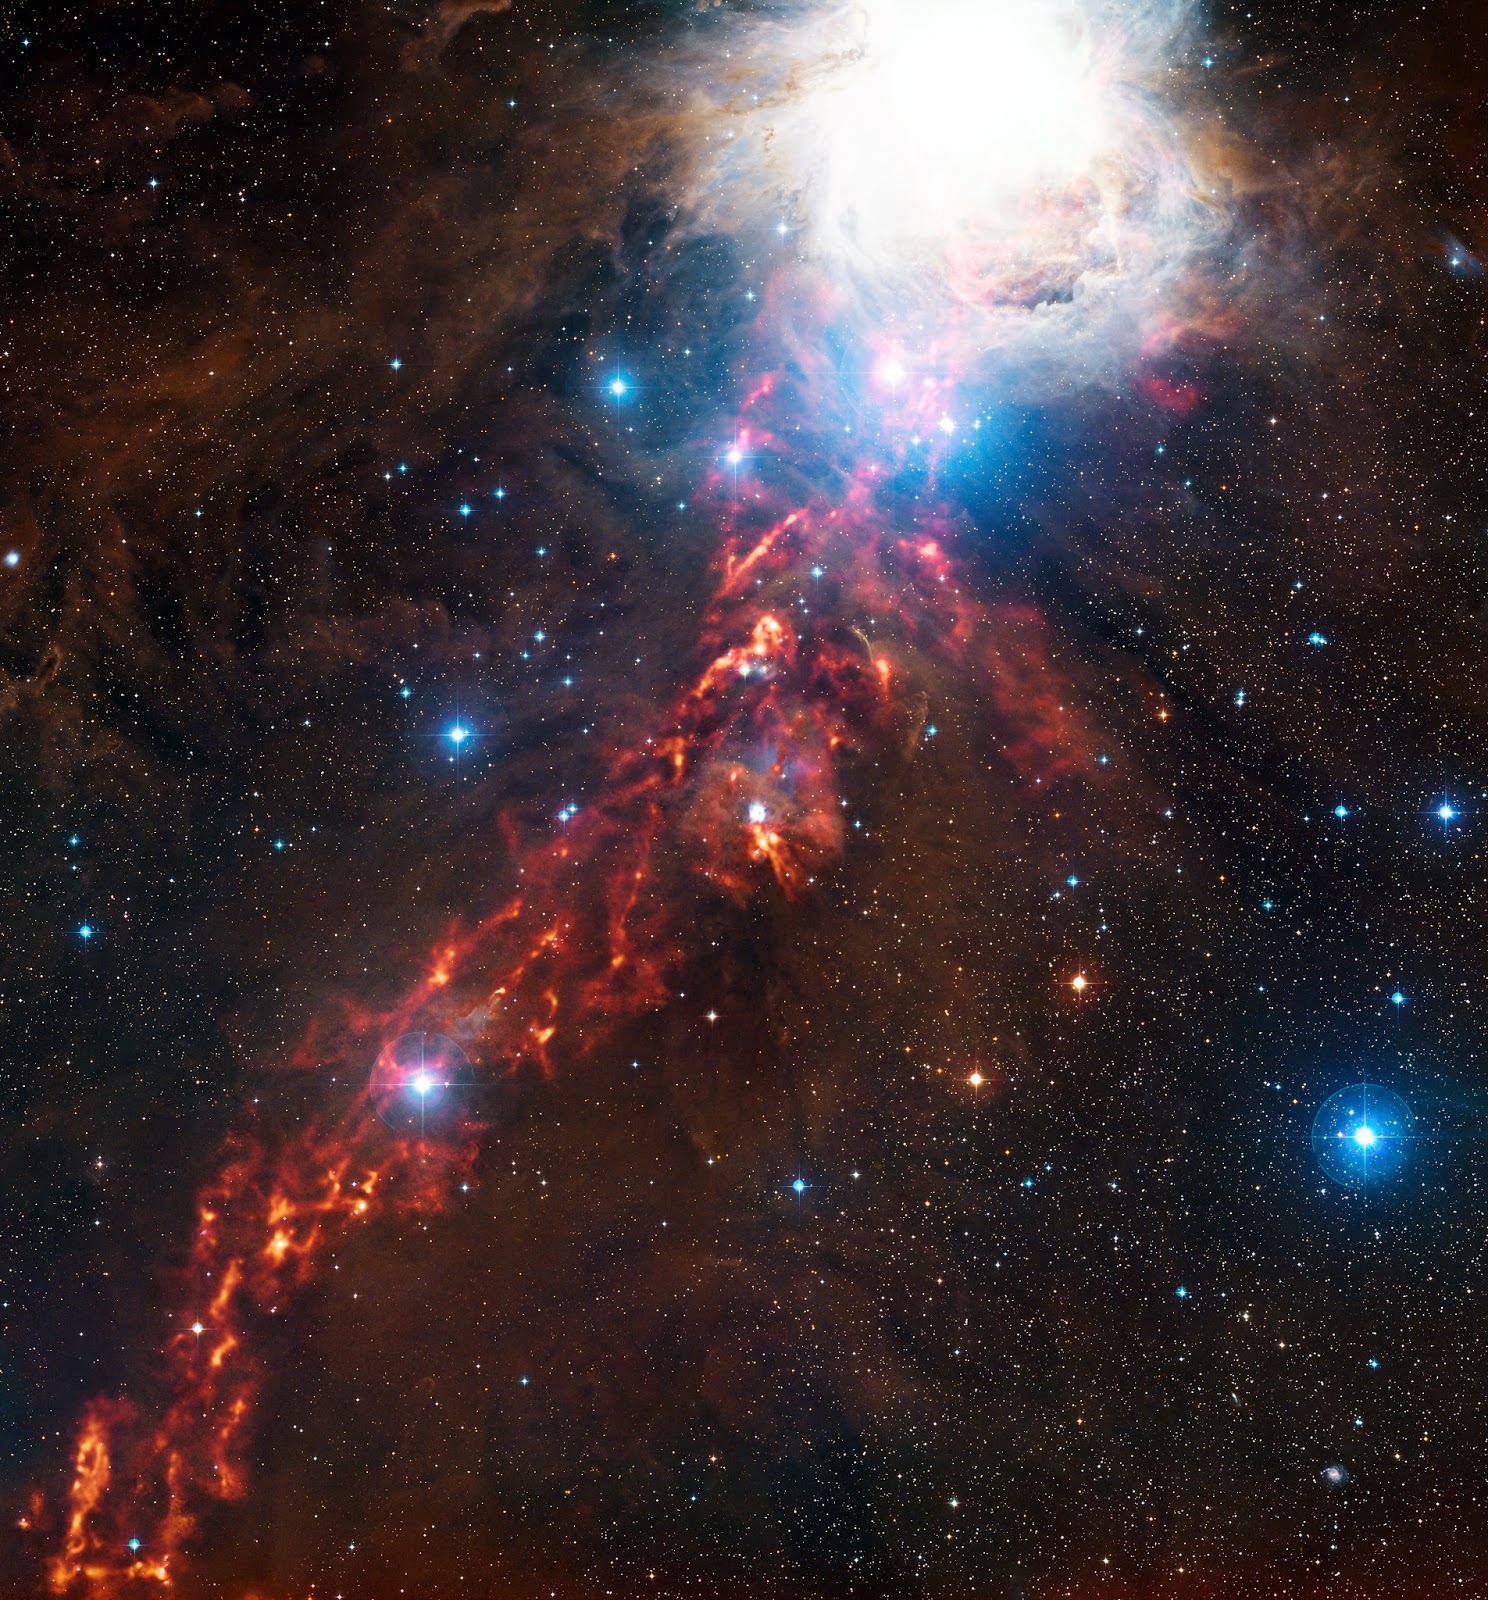 Star Formation in the Orion Nebula